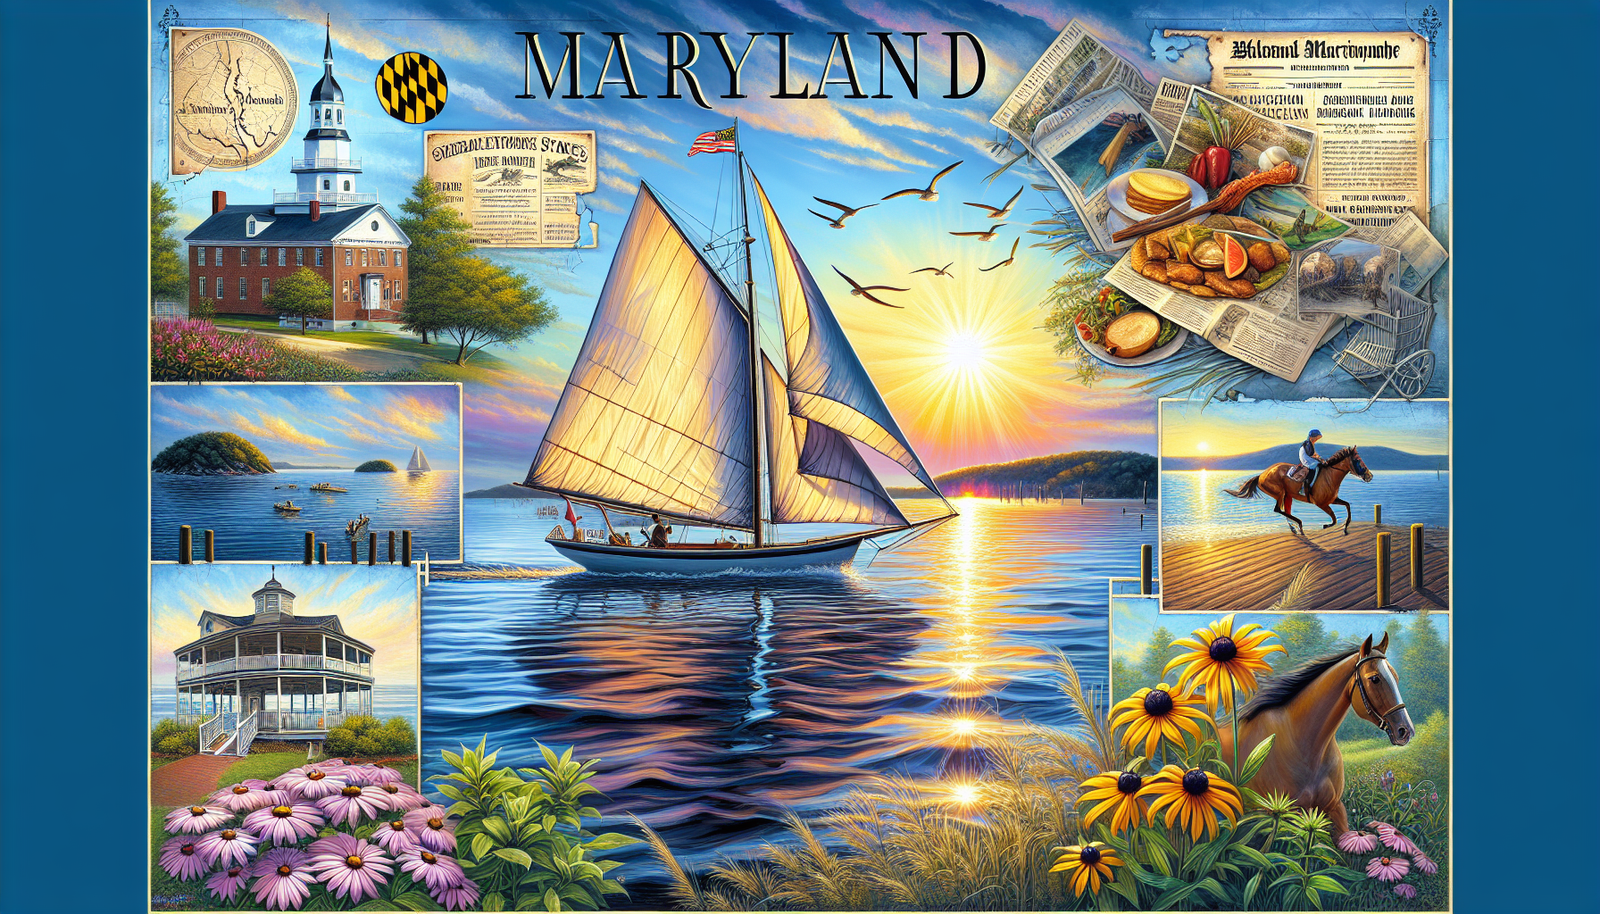 Uncover New Market Adventures: A Guide to Maryland’s Charm